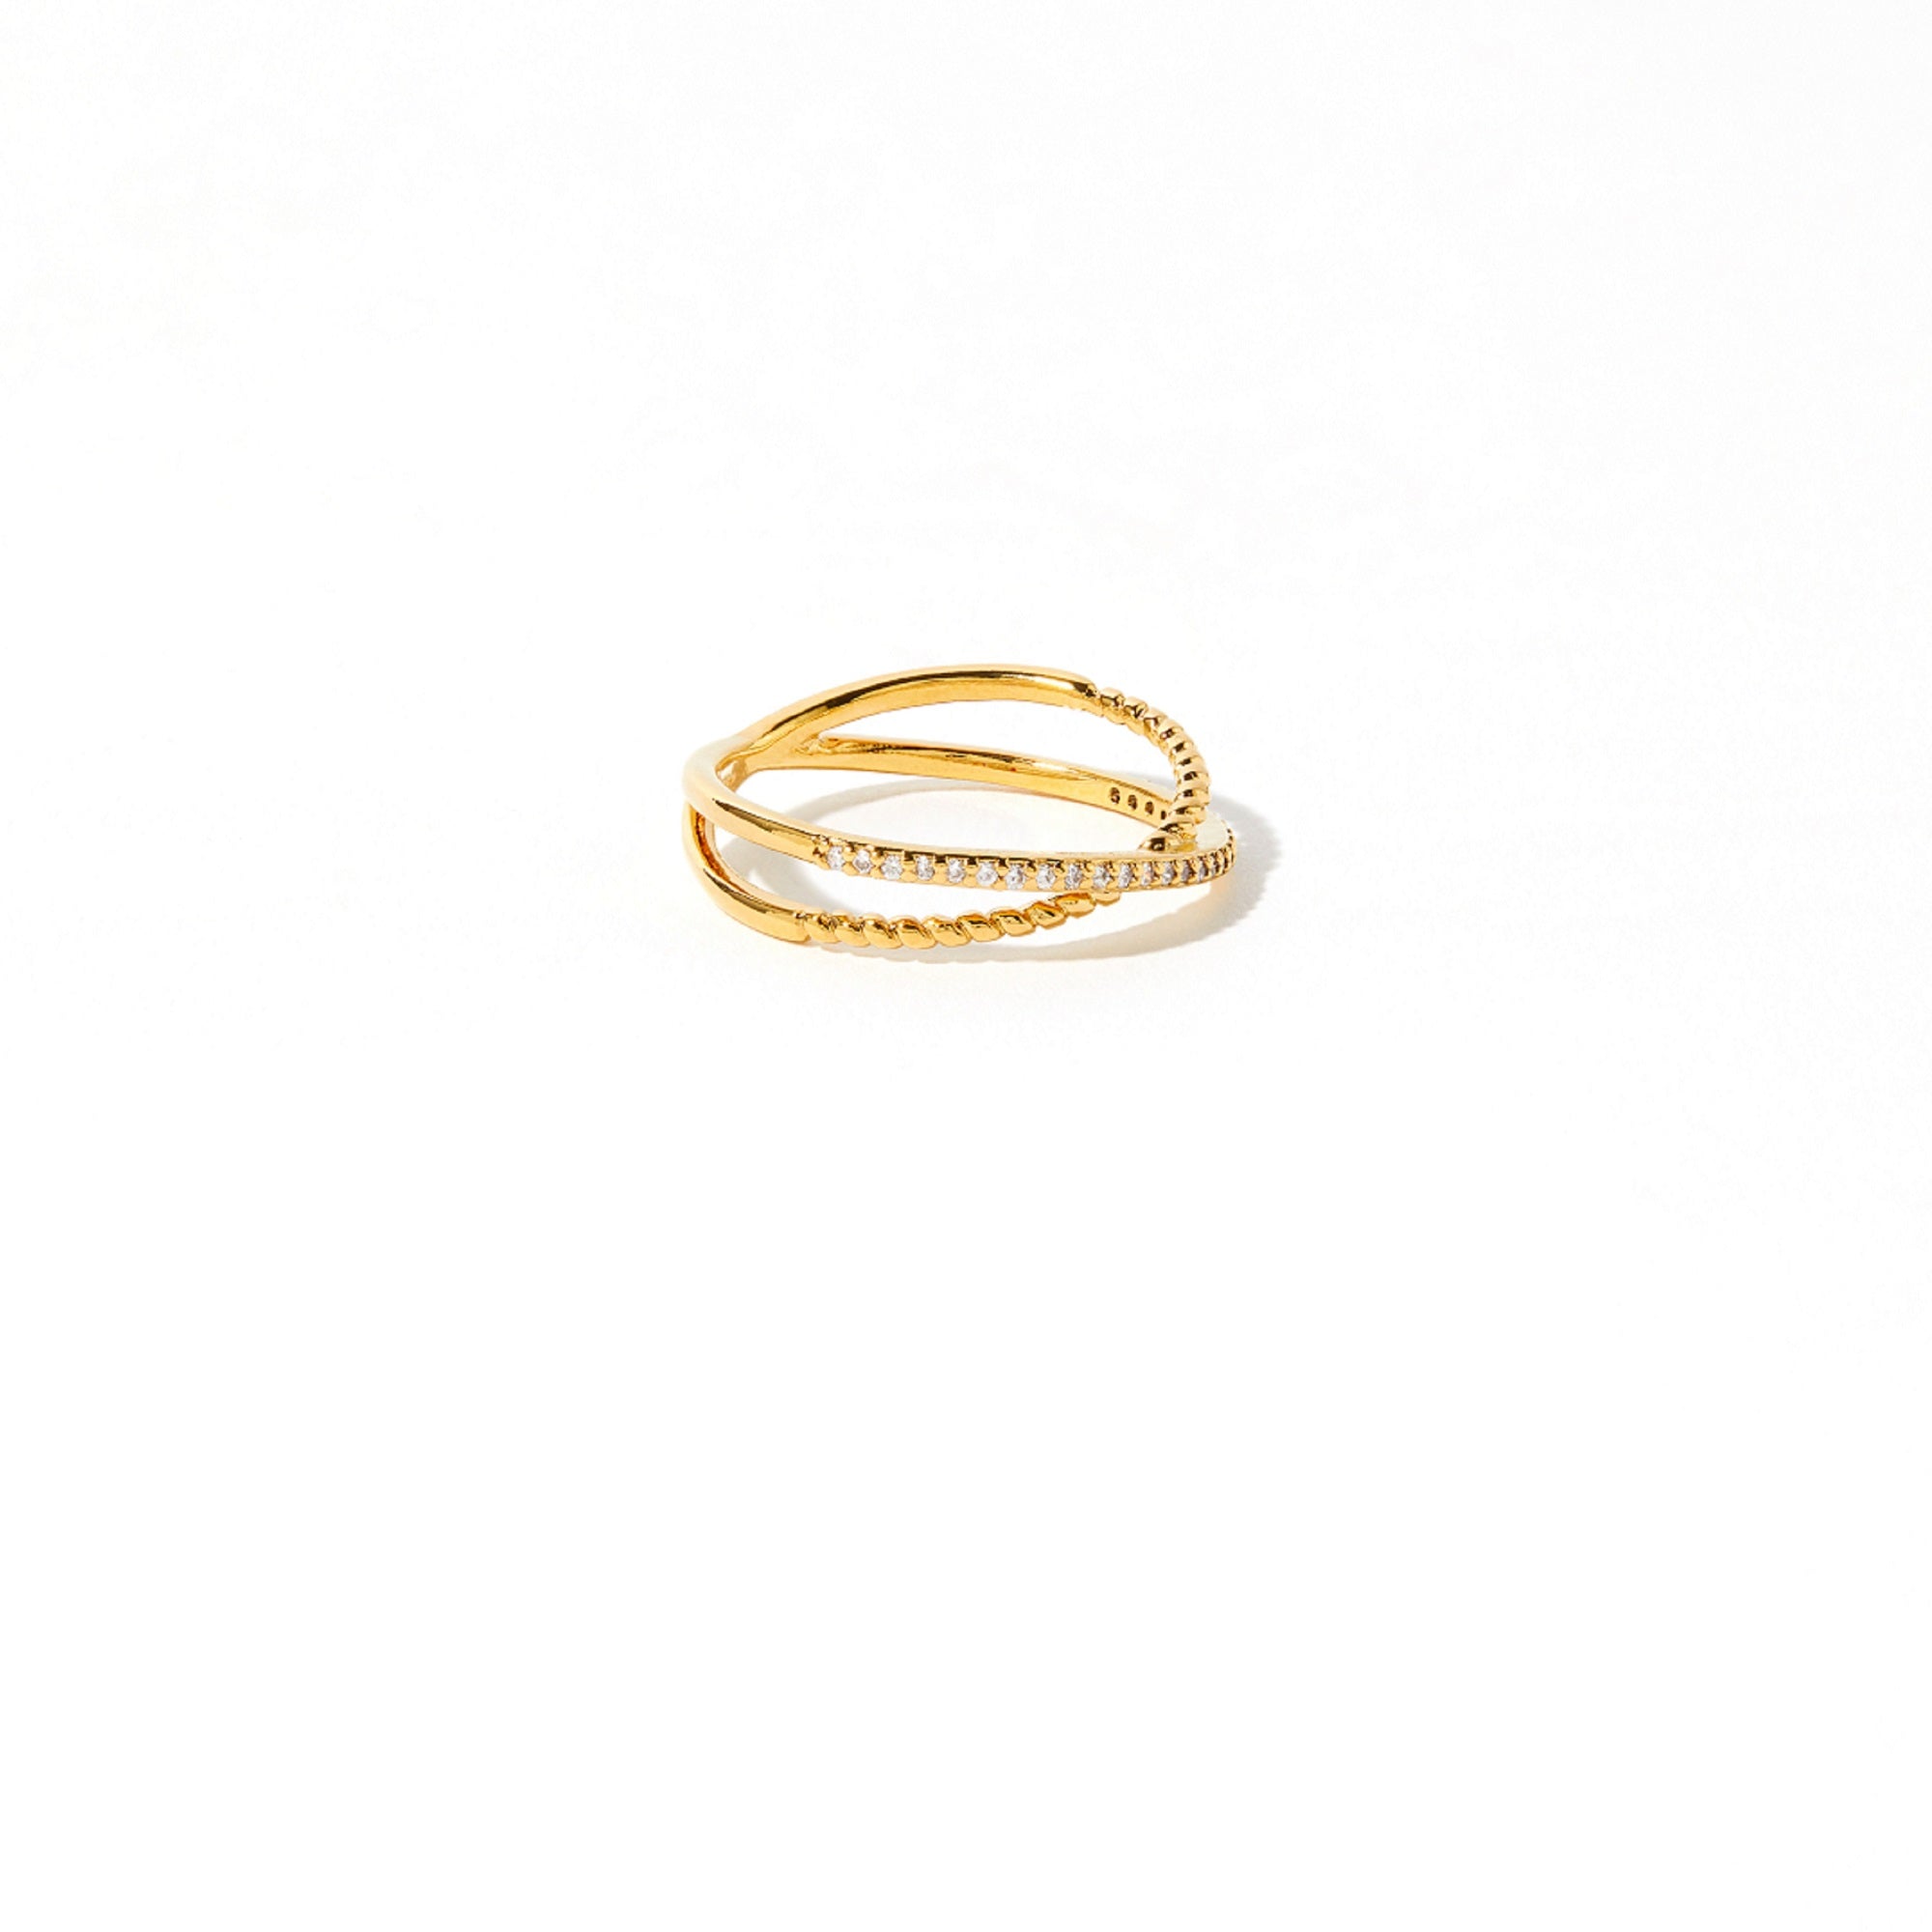 Real Gold Plated Pave Crossover Ring For Women By Accessorize London